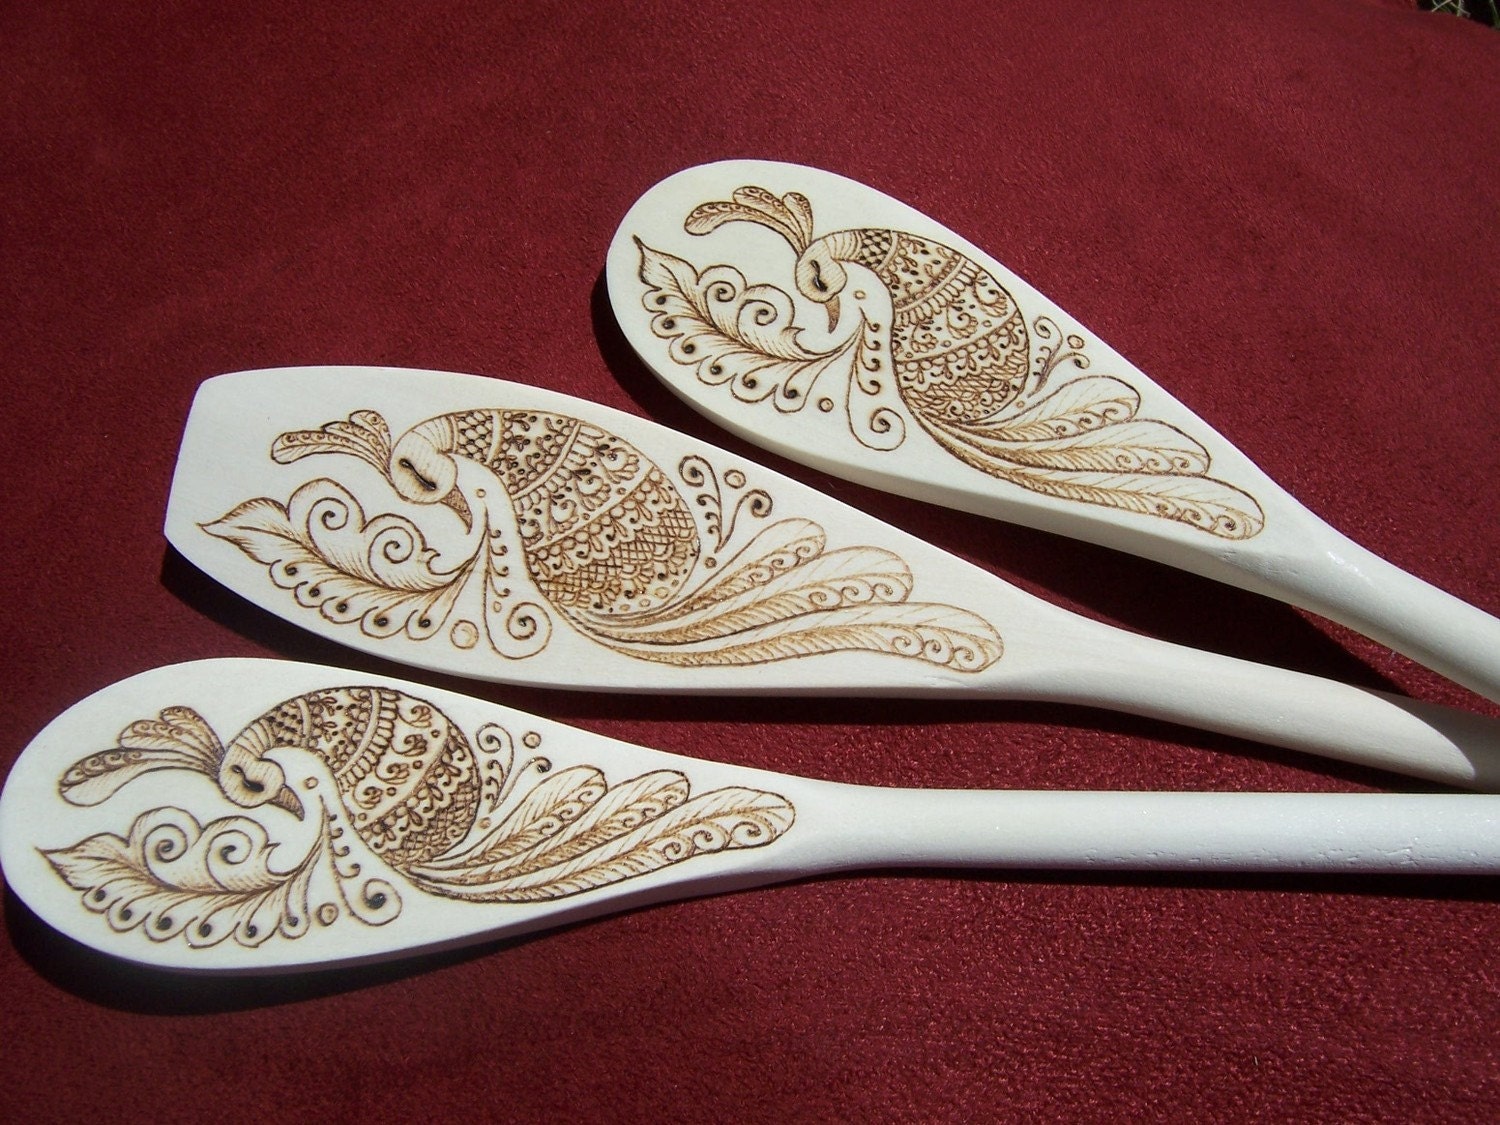 Peacock with Leaf Henna Inspired Wooden Spoon Set - Made To Order